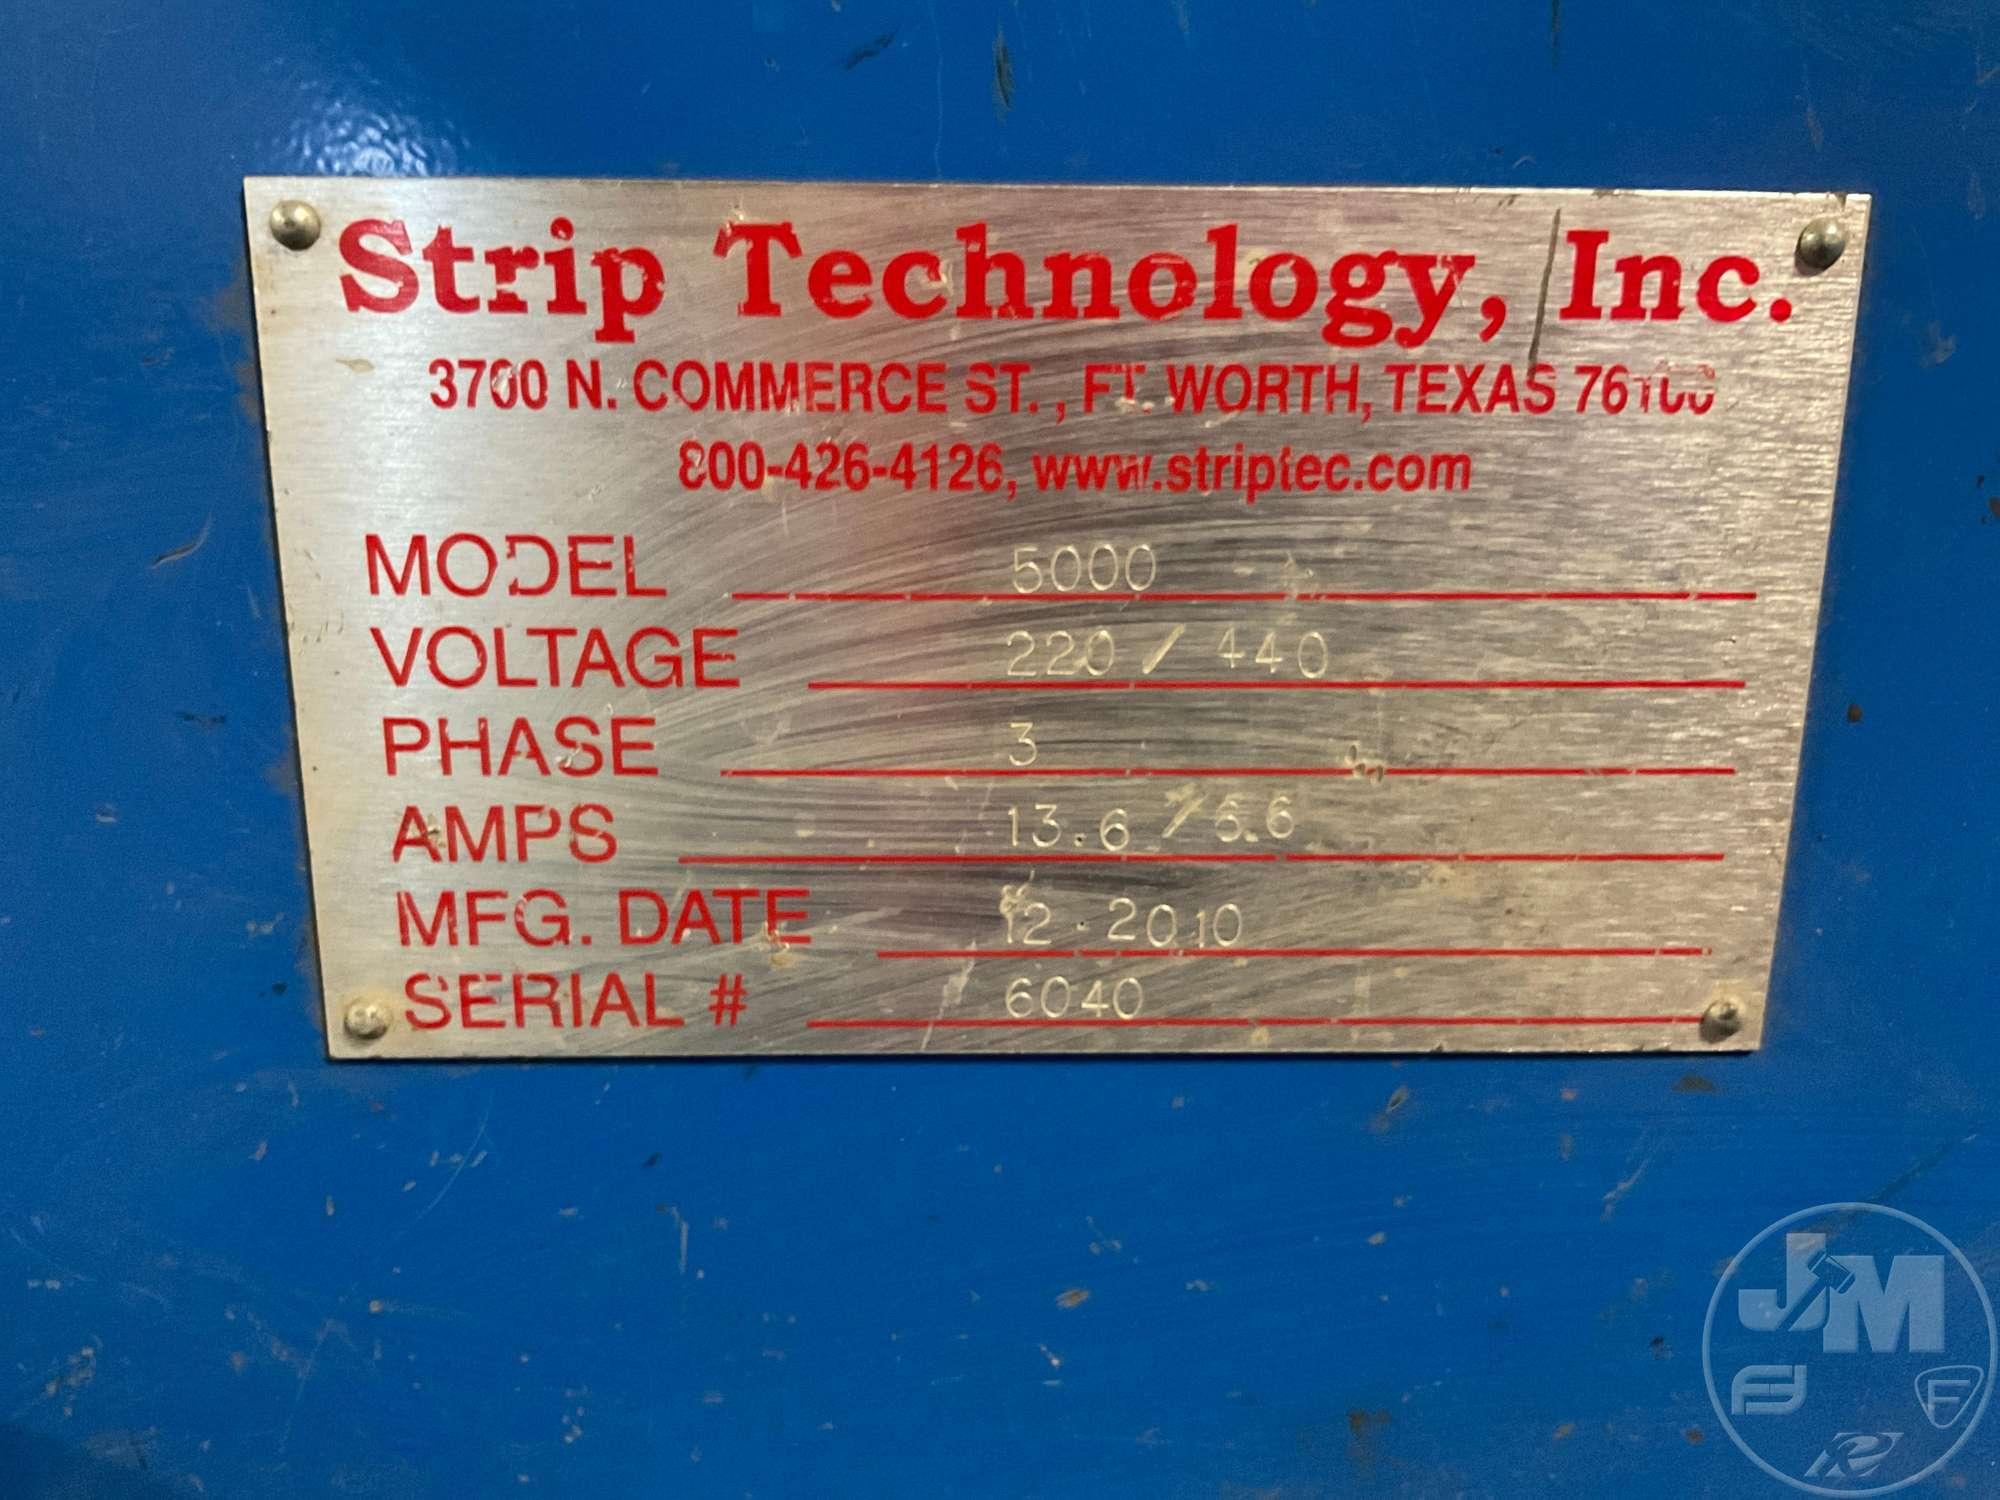 STRIP TECHNOLOGY, INC. MODEL#5000, SERIAL# 6040, 1/4”...... TO 4”......, 5HP